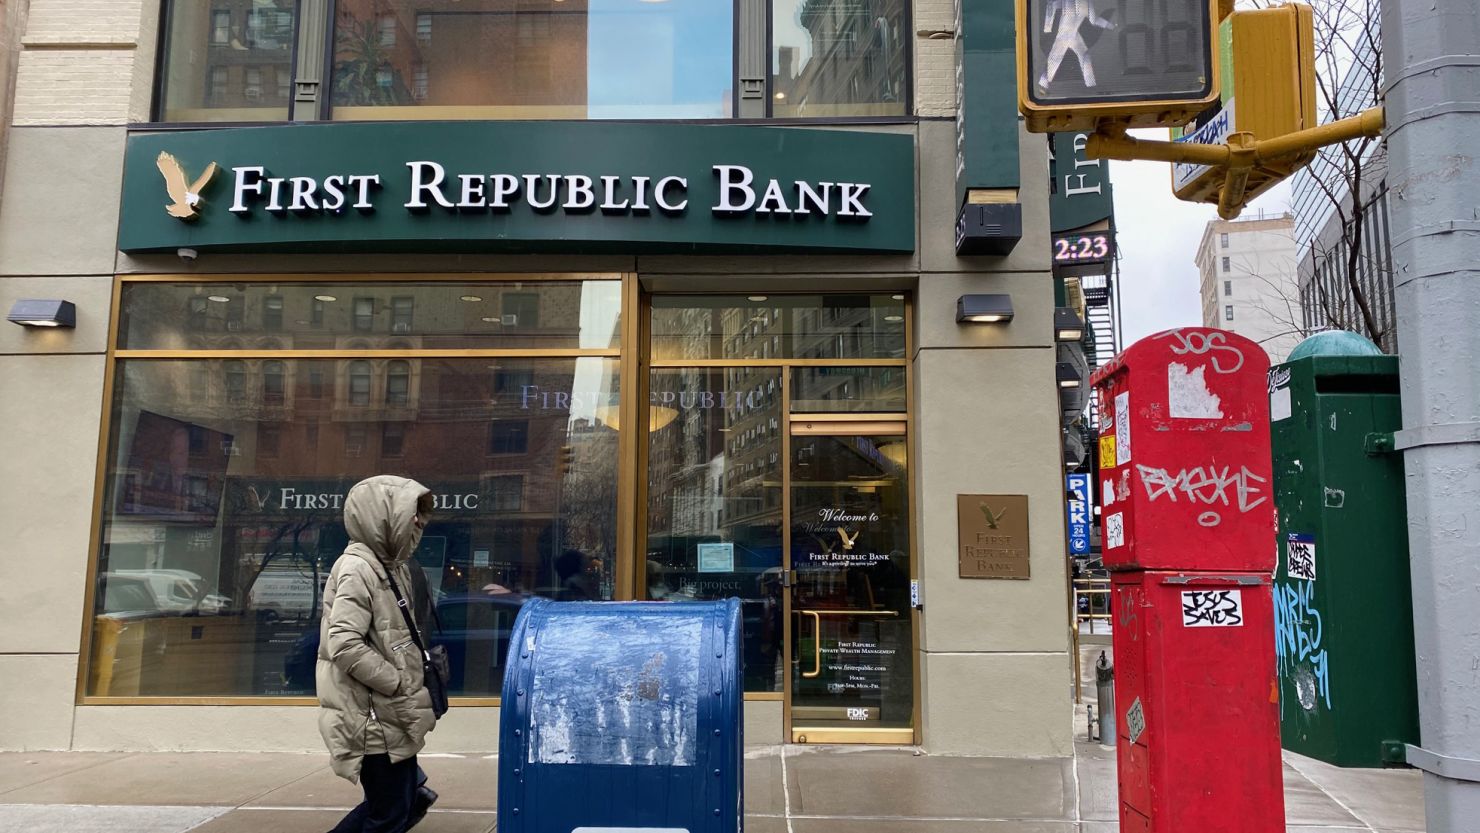 The exterior of a First Republic Bank branch is seen on Broadway on the Upper West Side in New York City, on March 13, 2023.